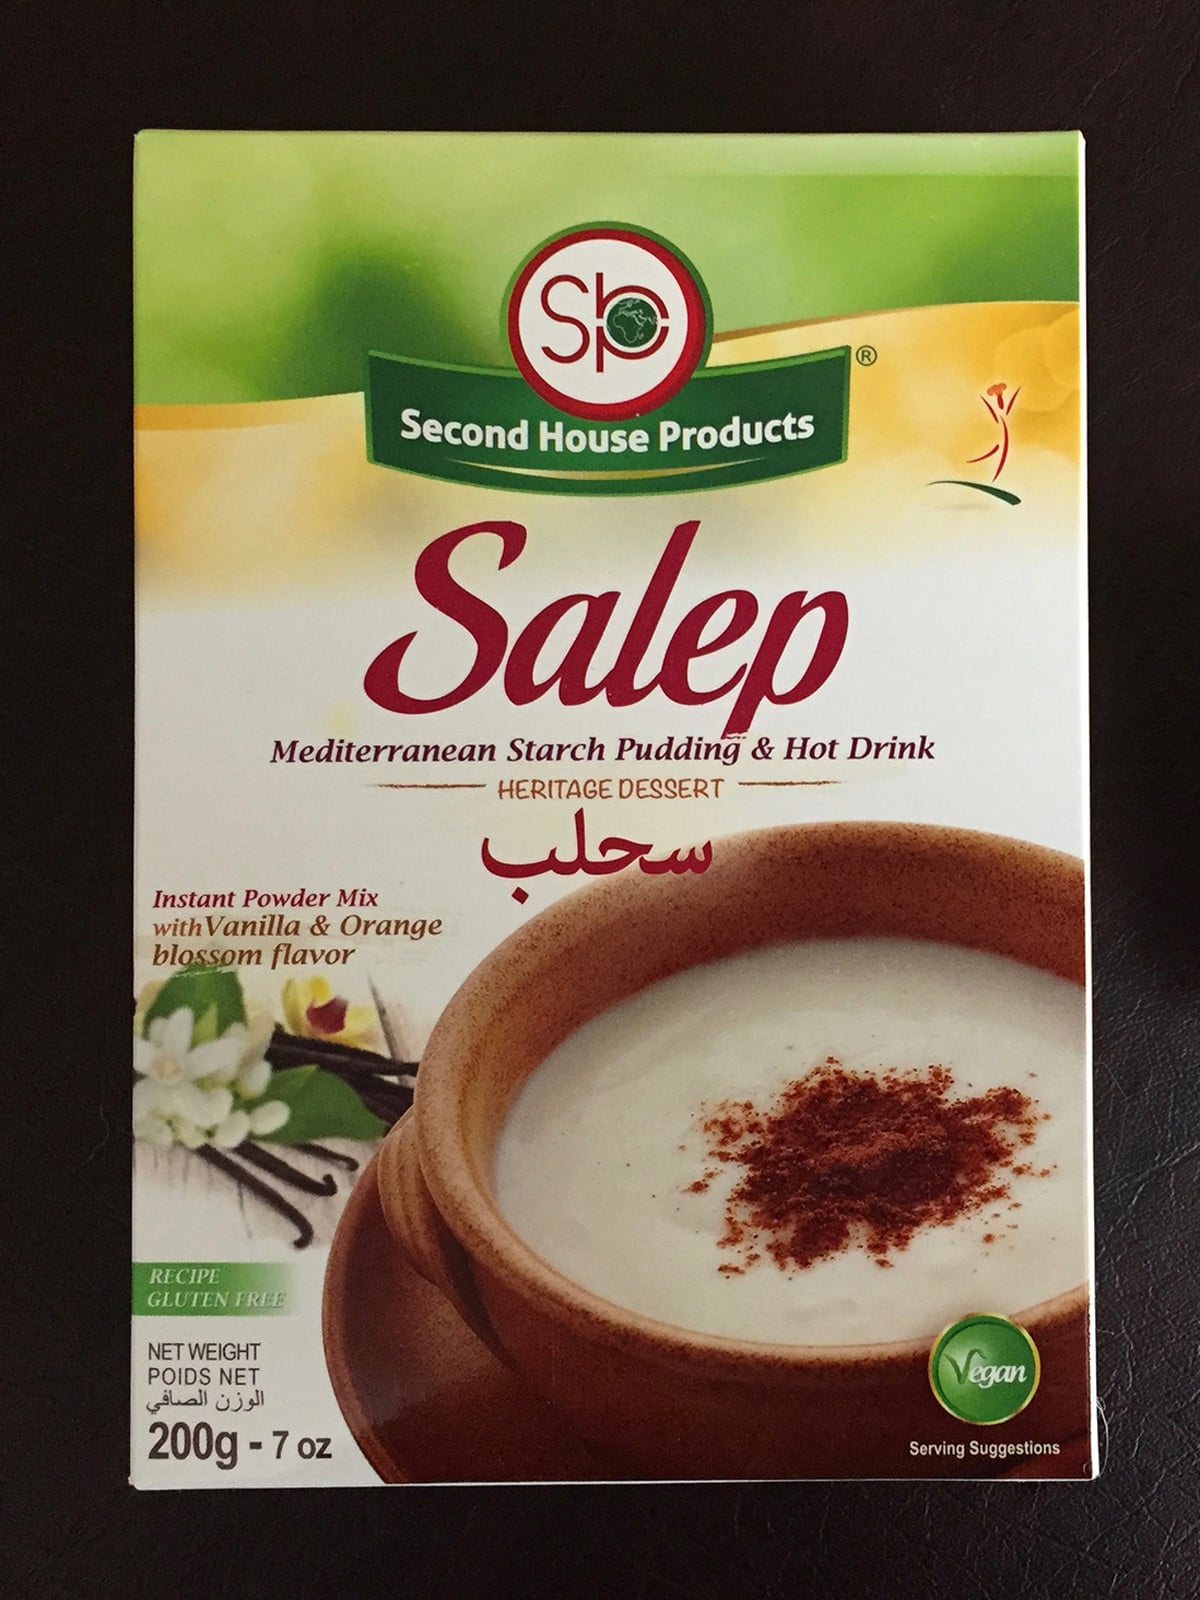 Box of salep - a Middle Eastern drink.